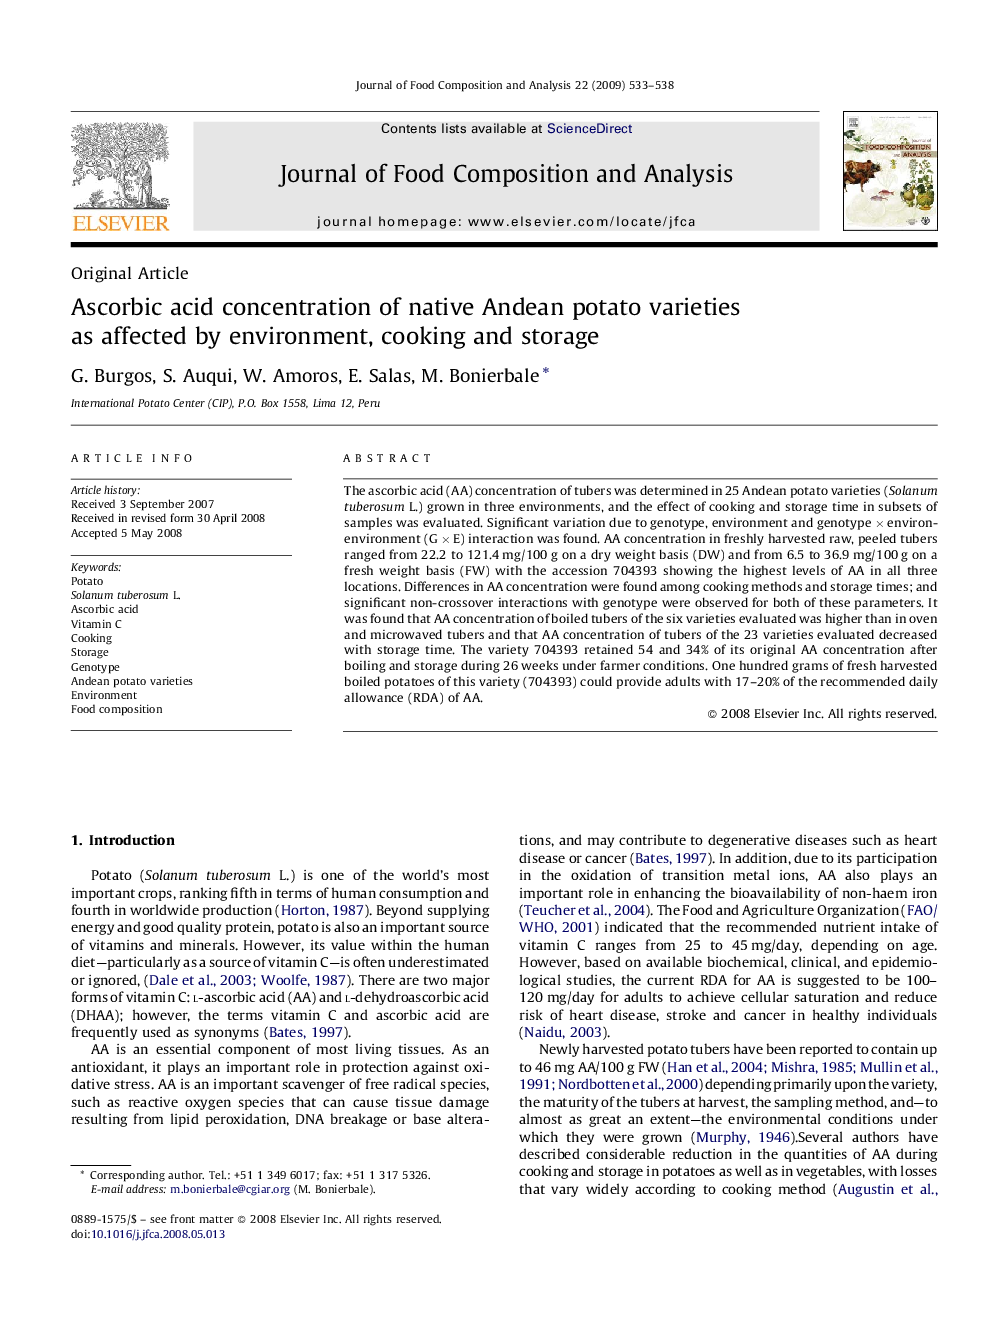 Ascorbic acid concentration of native Andean potato varieties as affected by environment, cooking and storage